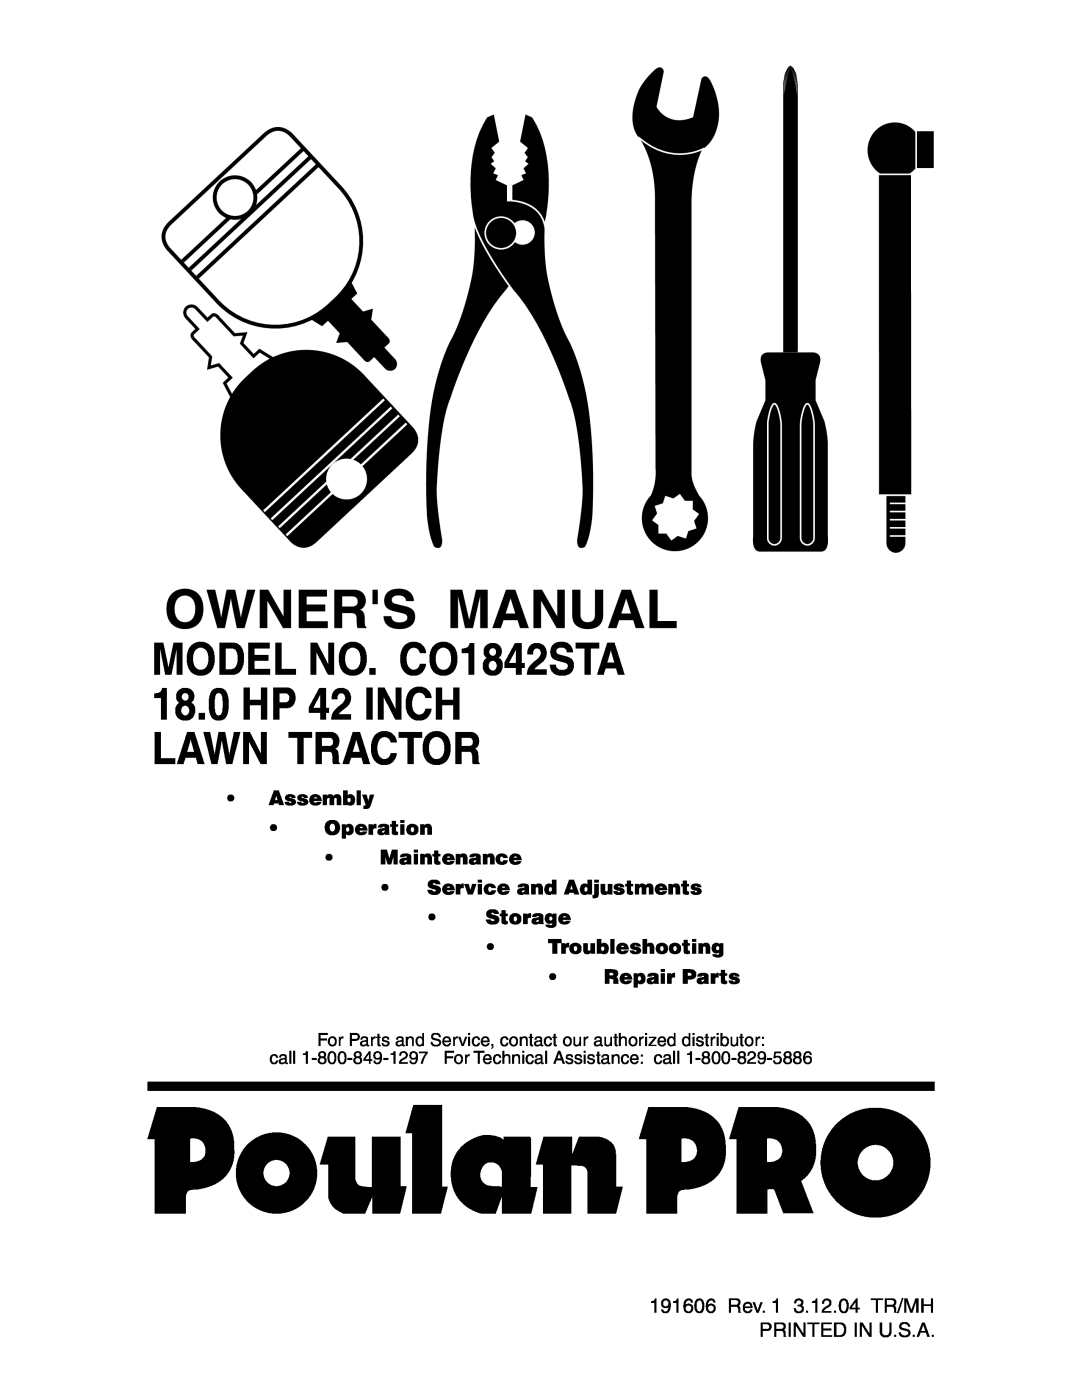 Poulan CO1842STA manual Assembly Operation Maintenance Service and Adjustments Storage, Troubleshooting Repair Parts 